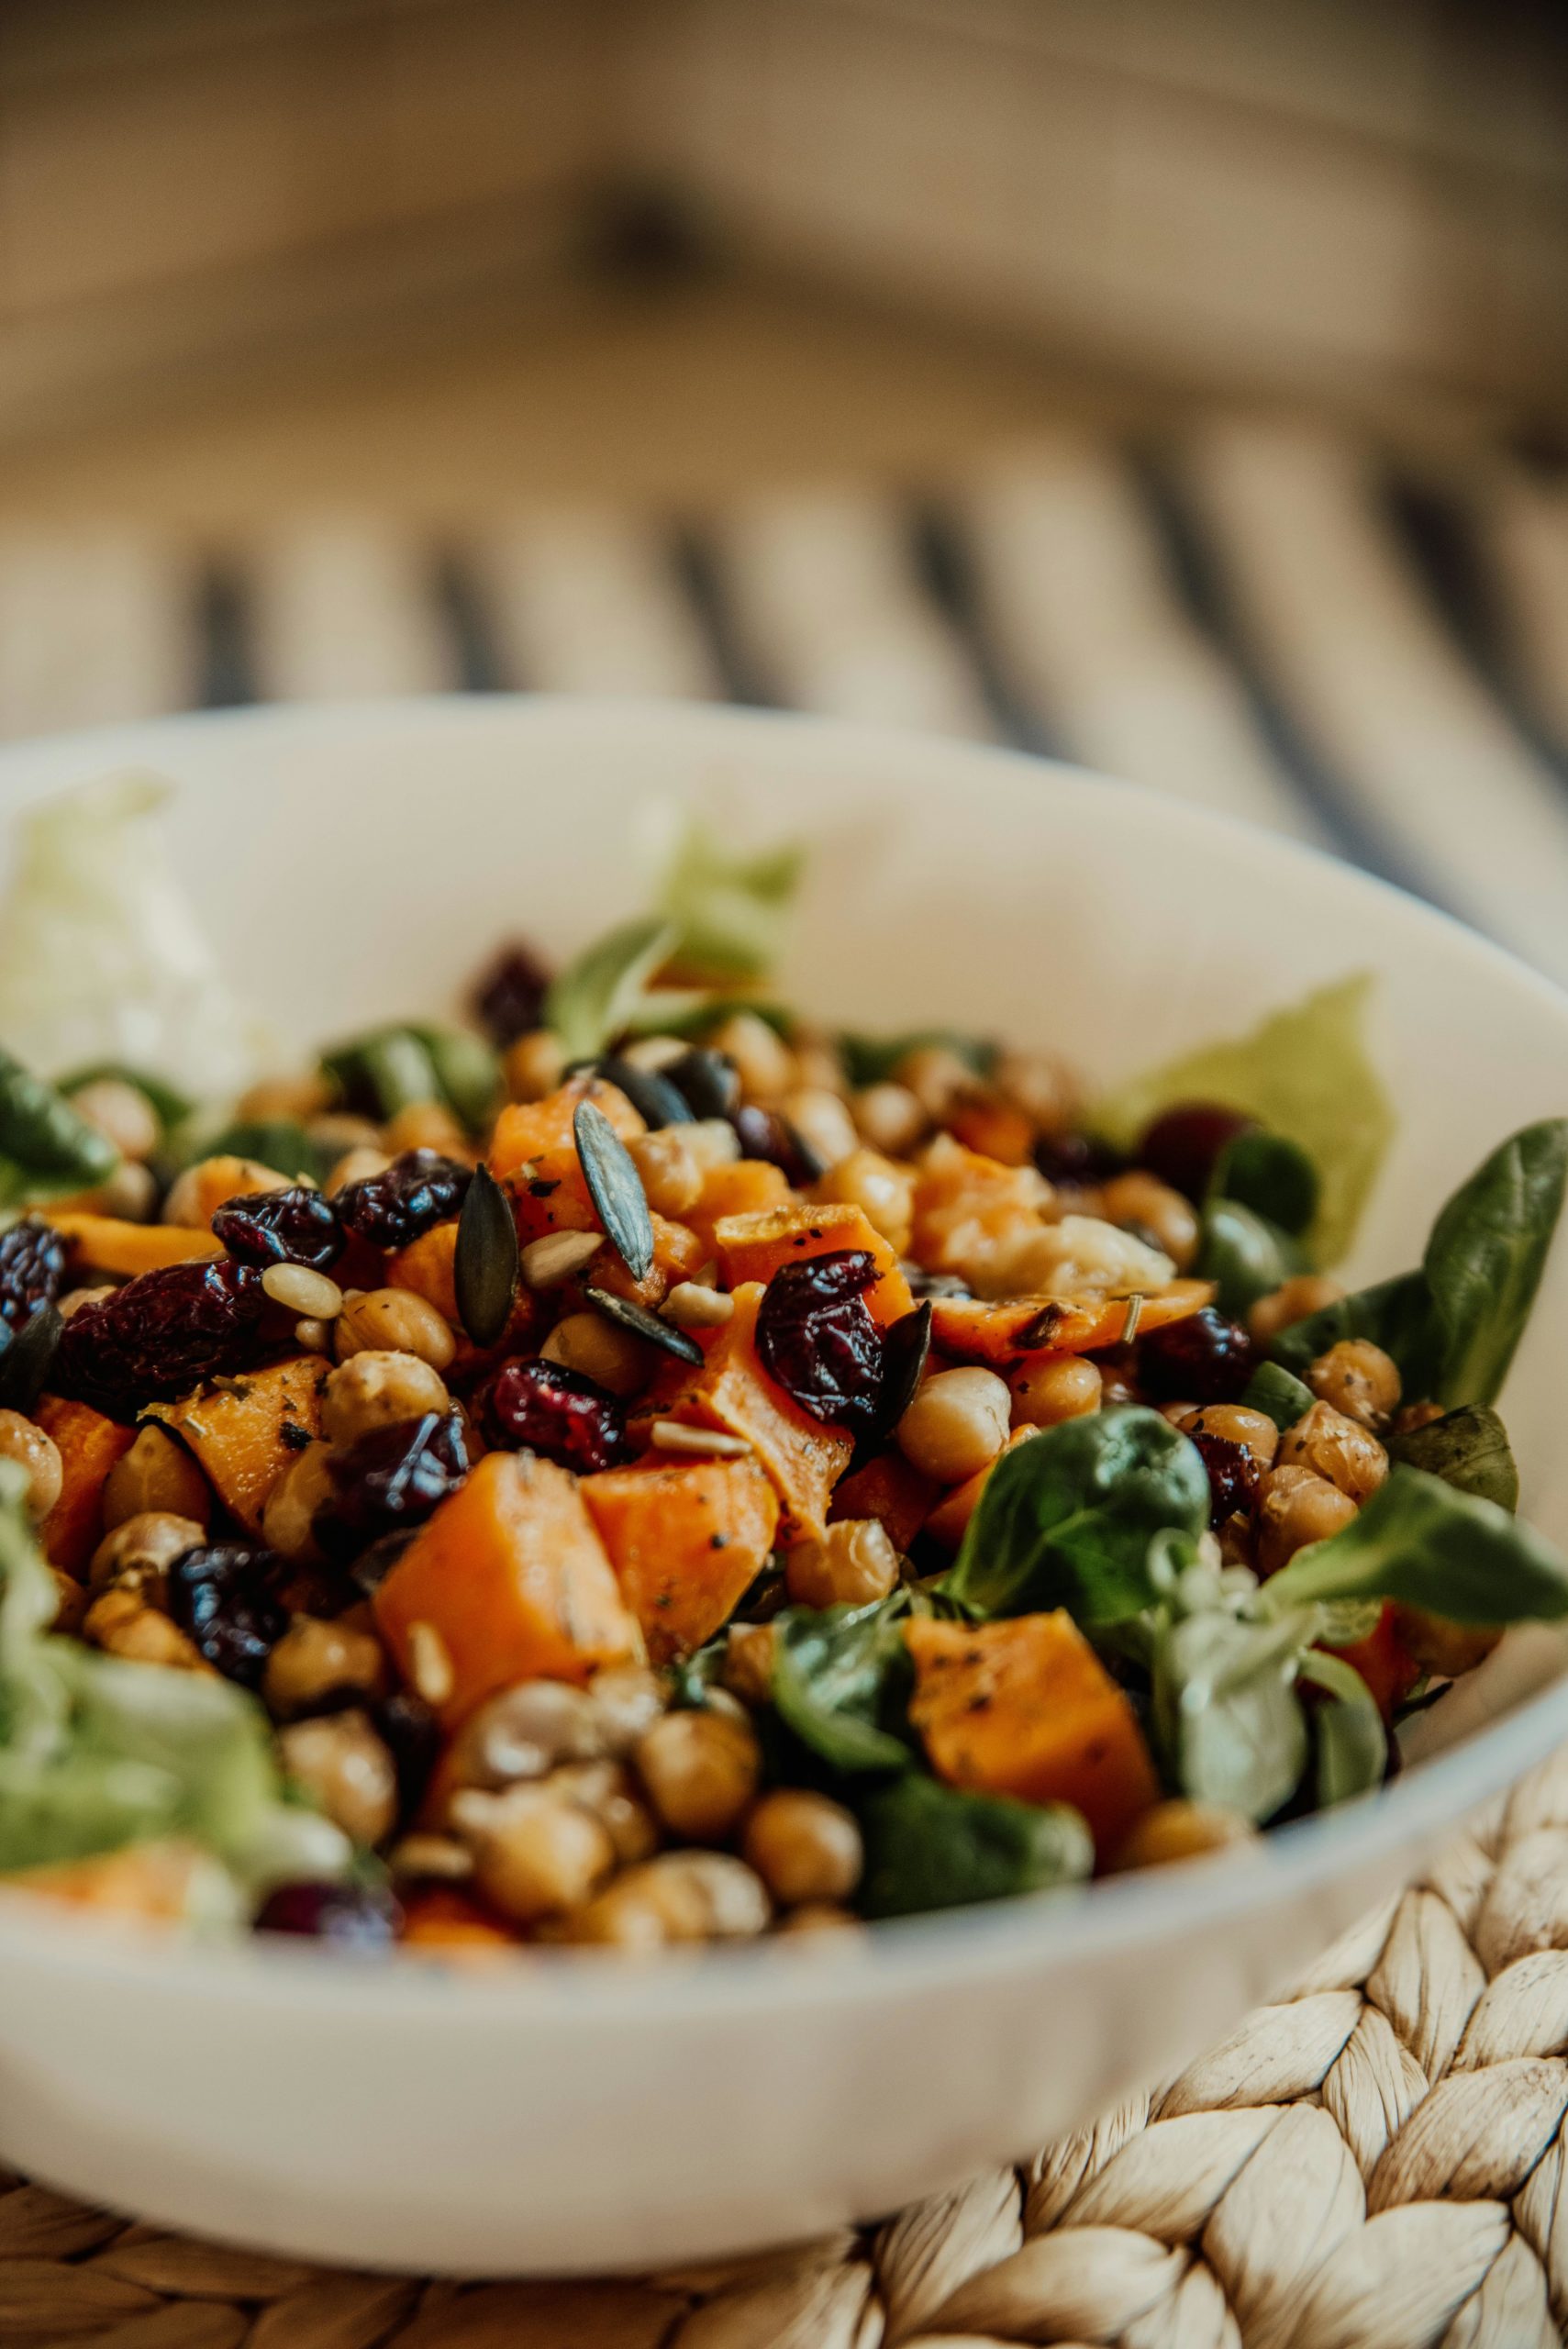 Vegetables and chickpeas, plant-based proteins